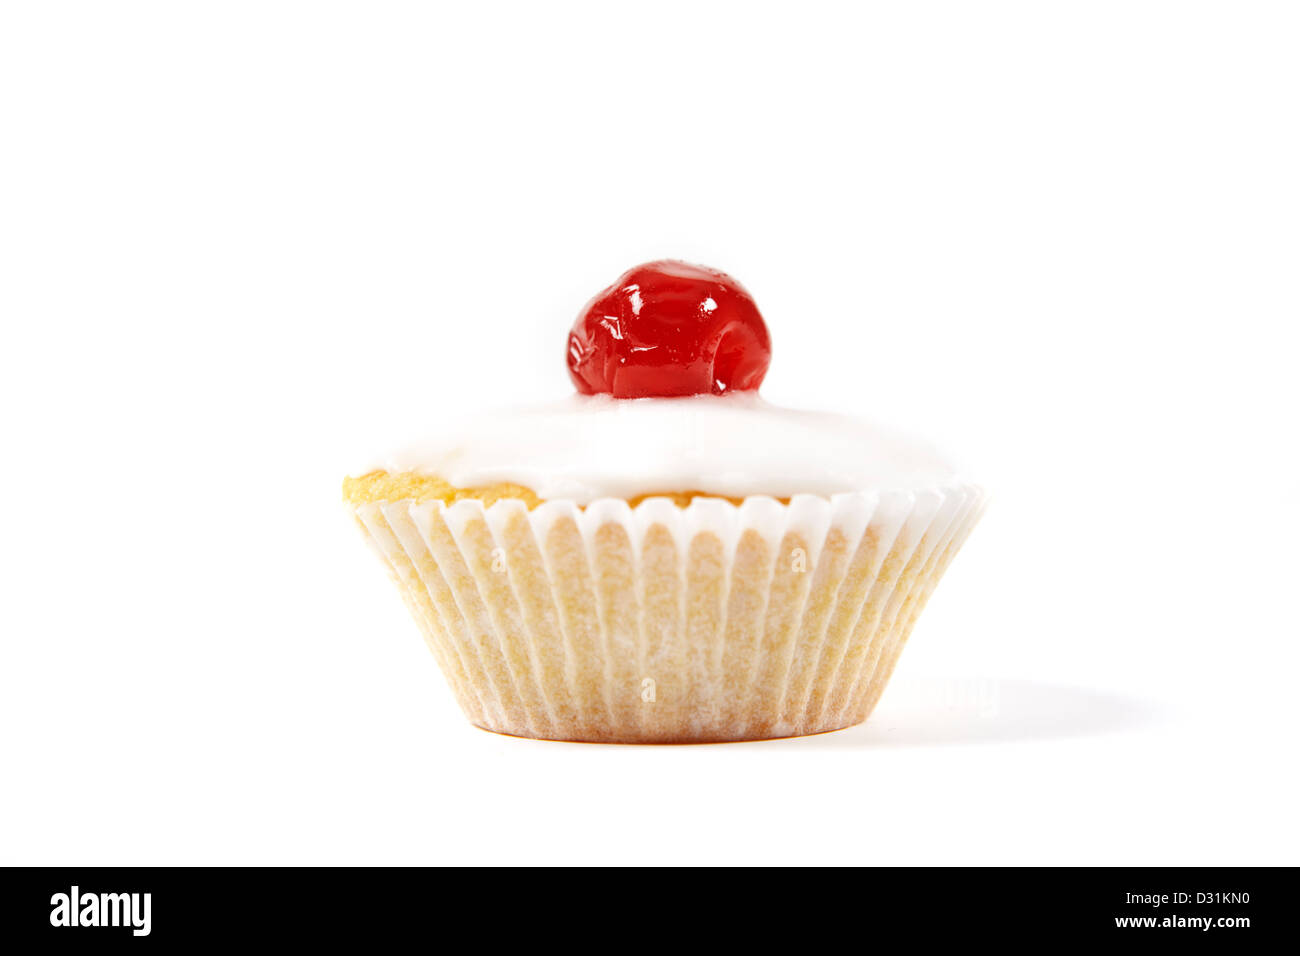 Iced cupcake with a cherry on top Stock Photo